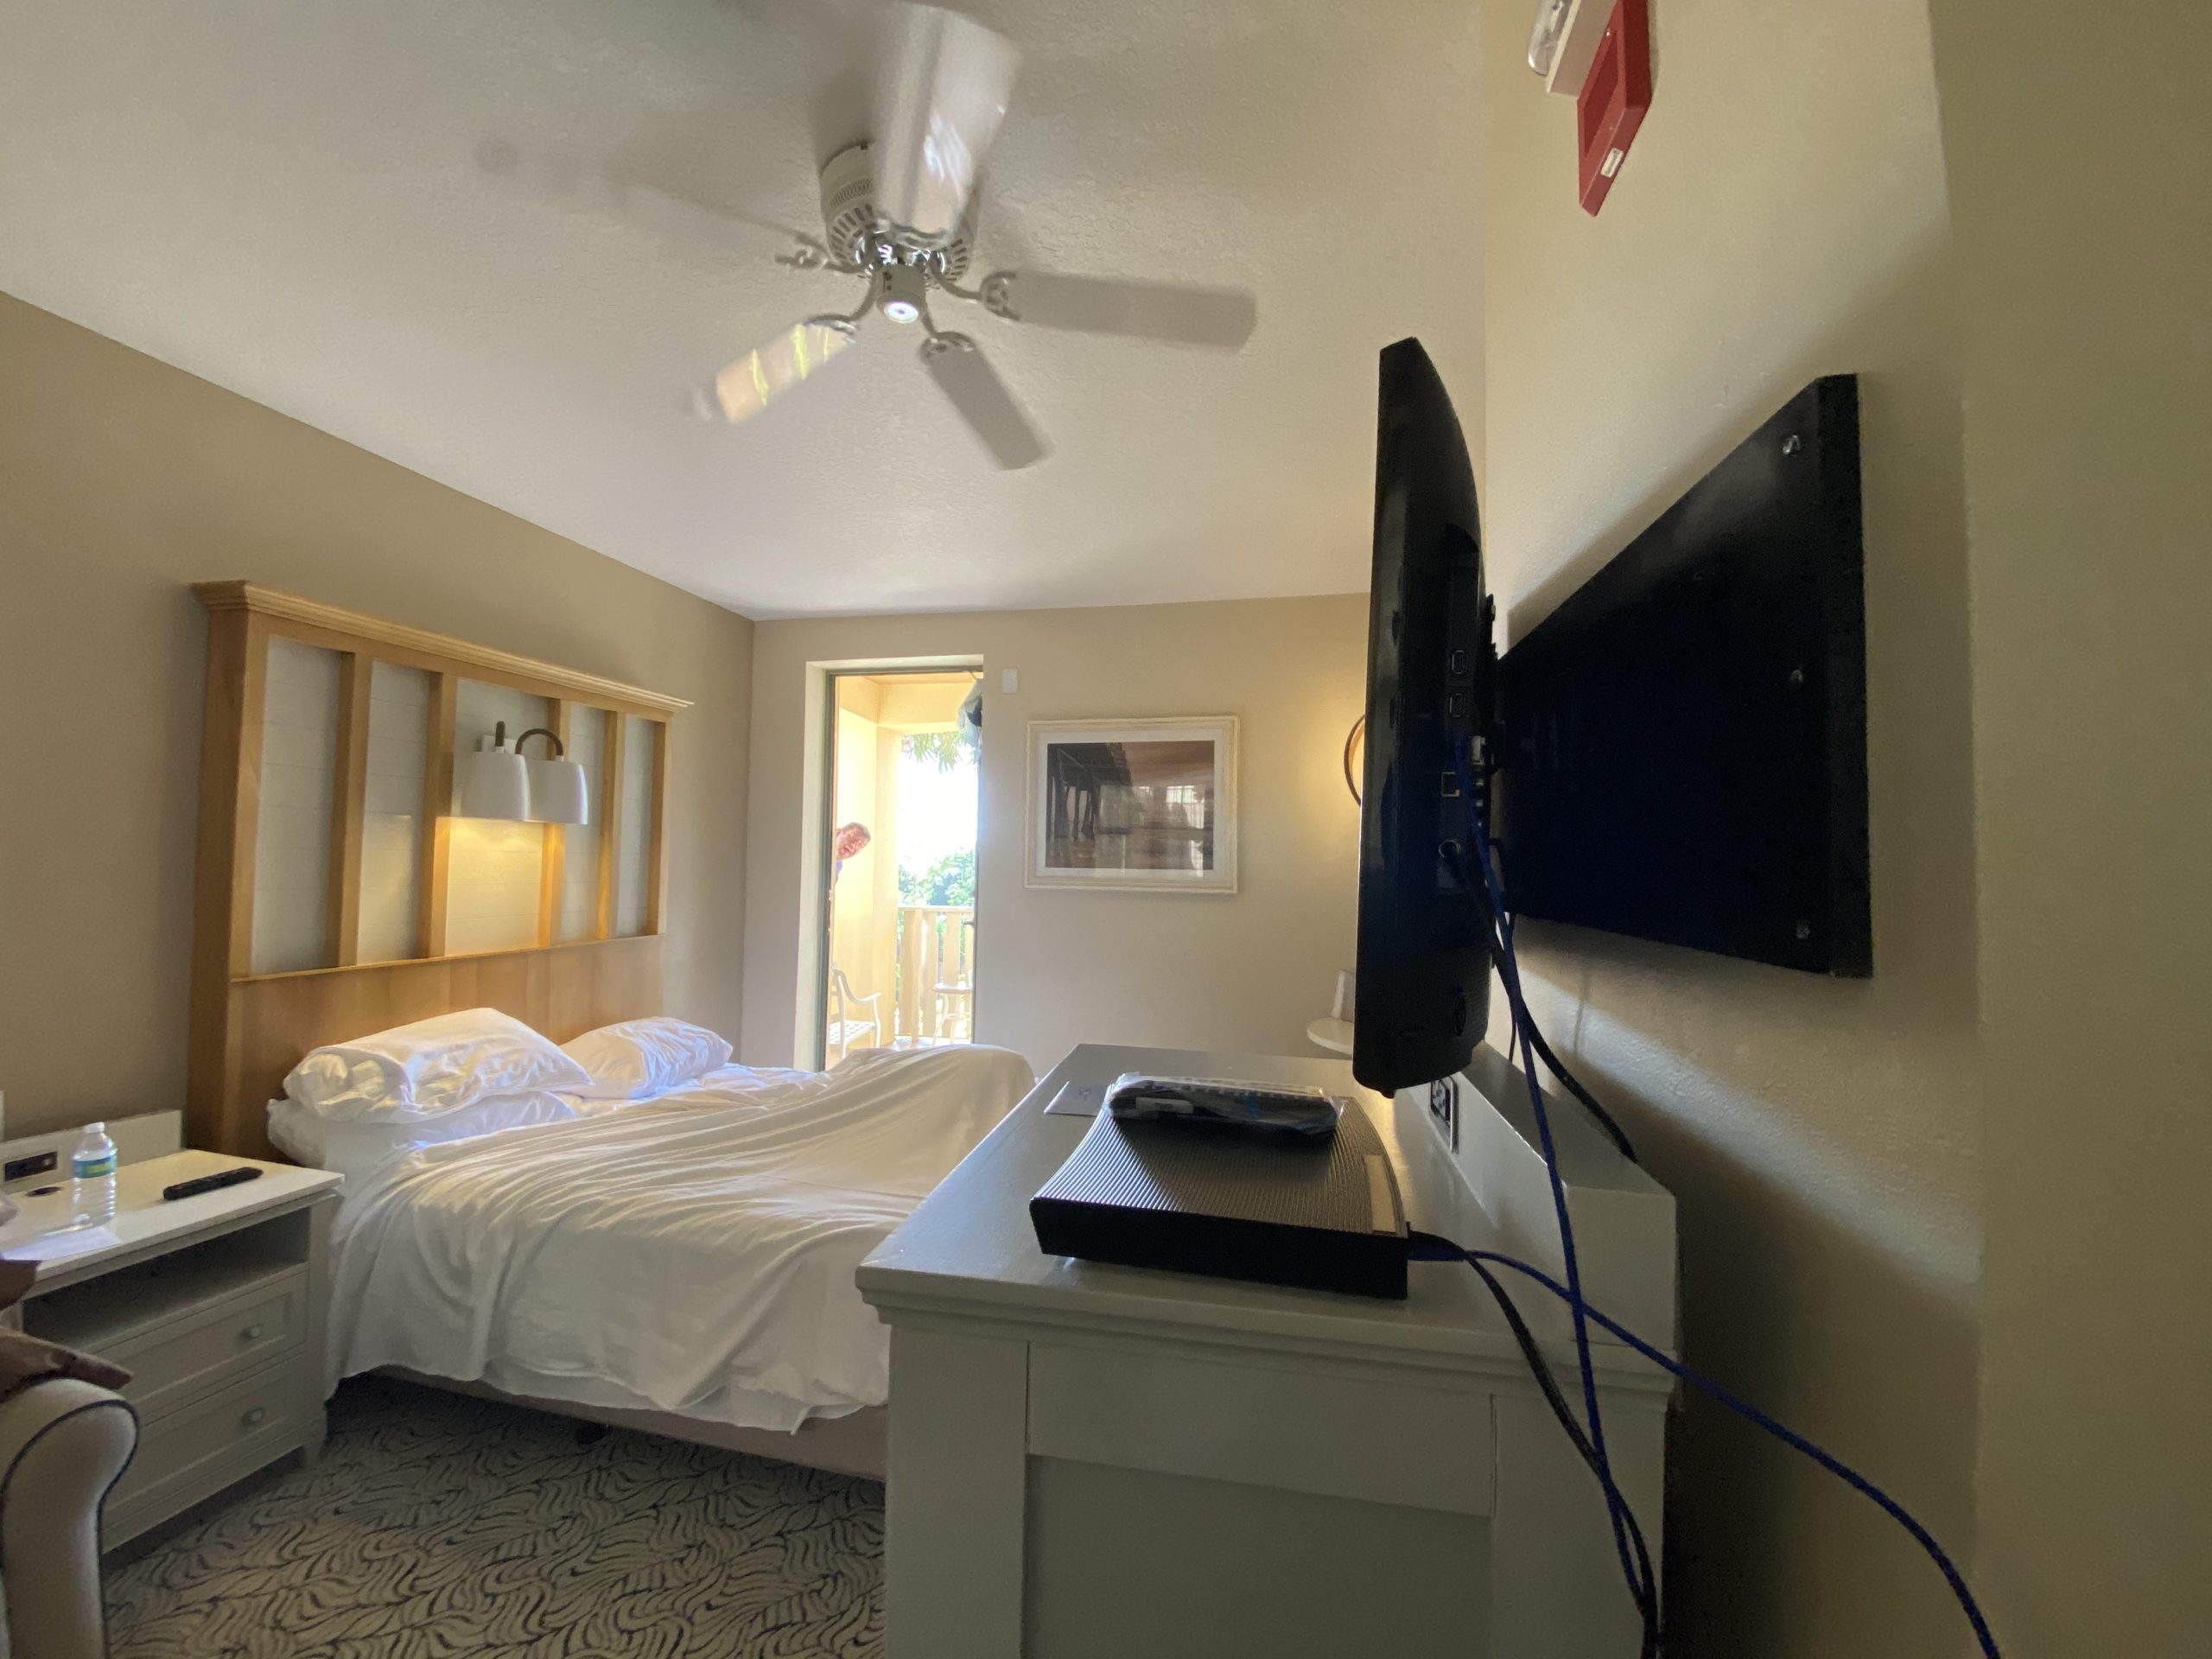 a tv on a wall in a bedroom